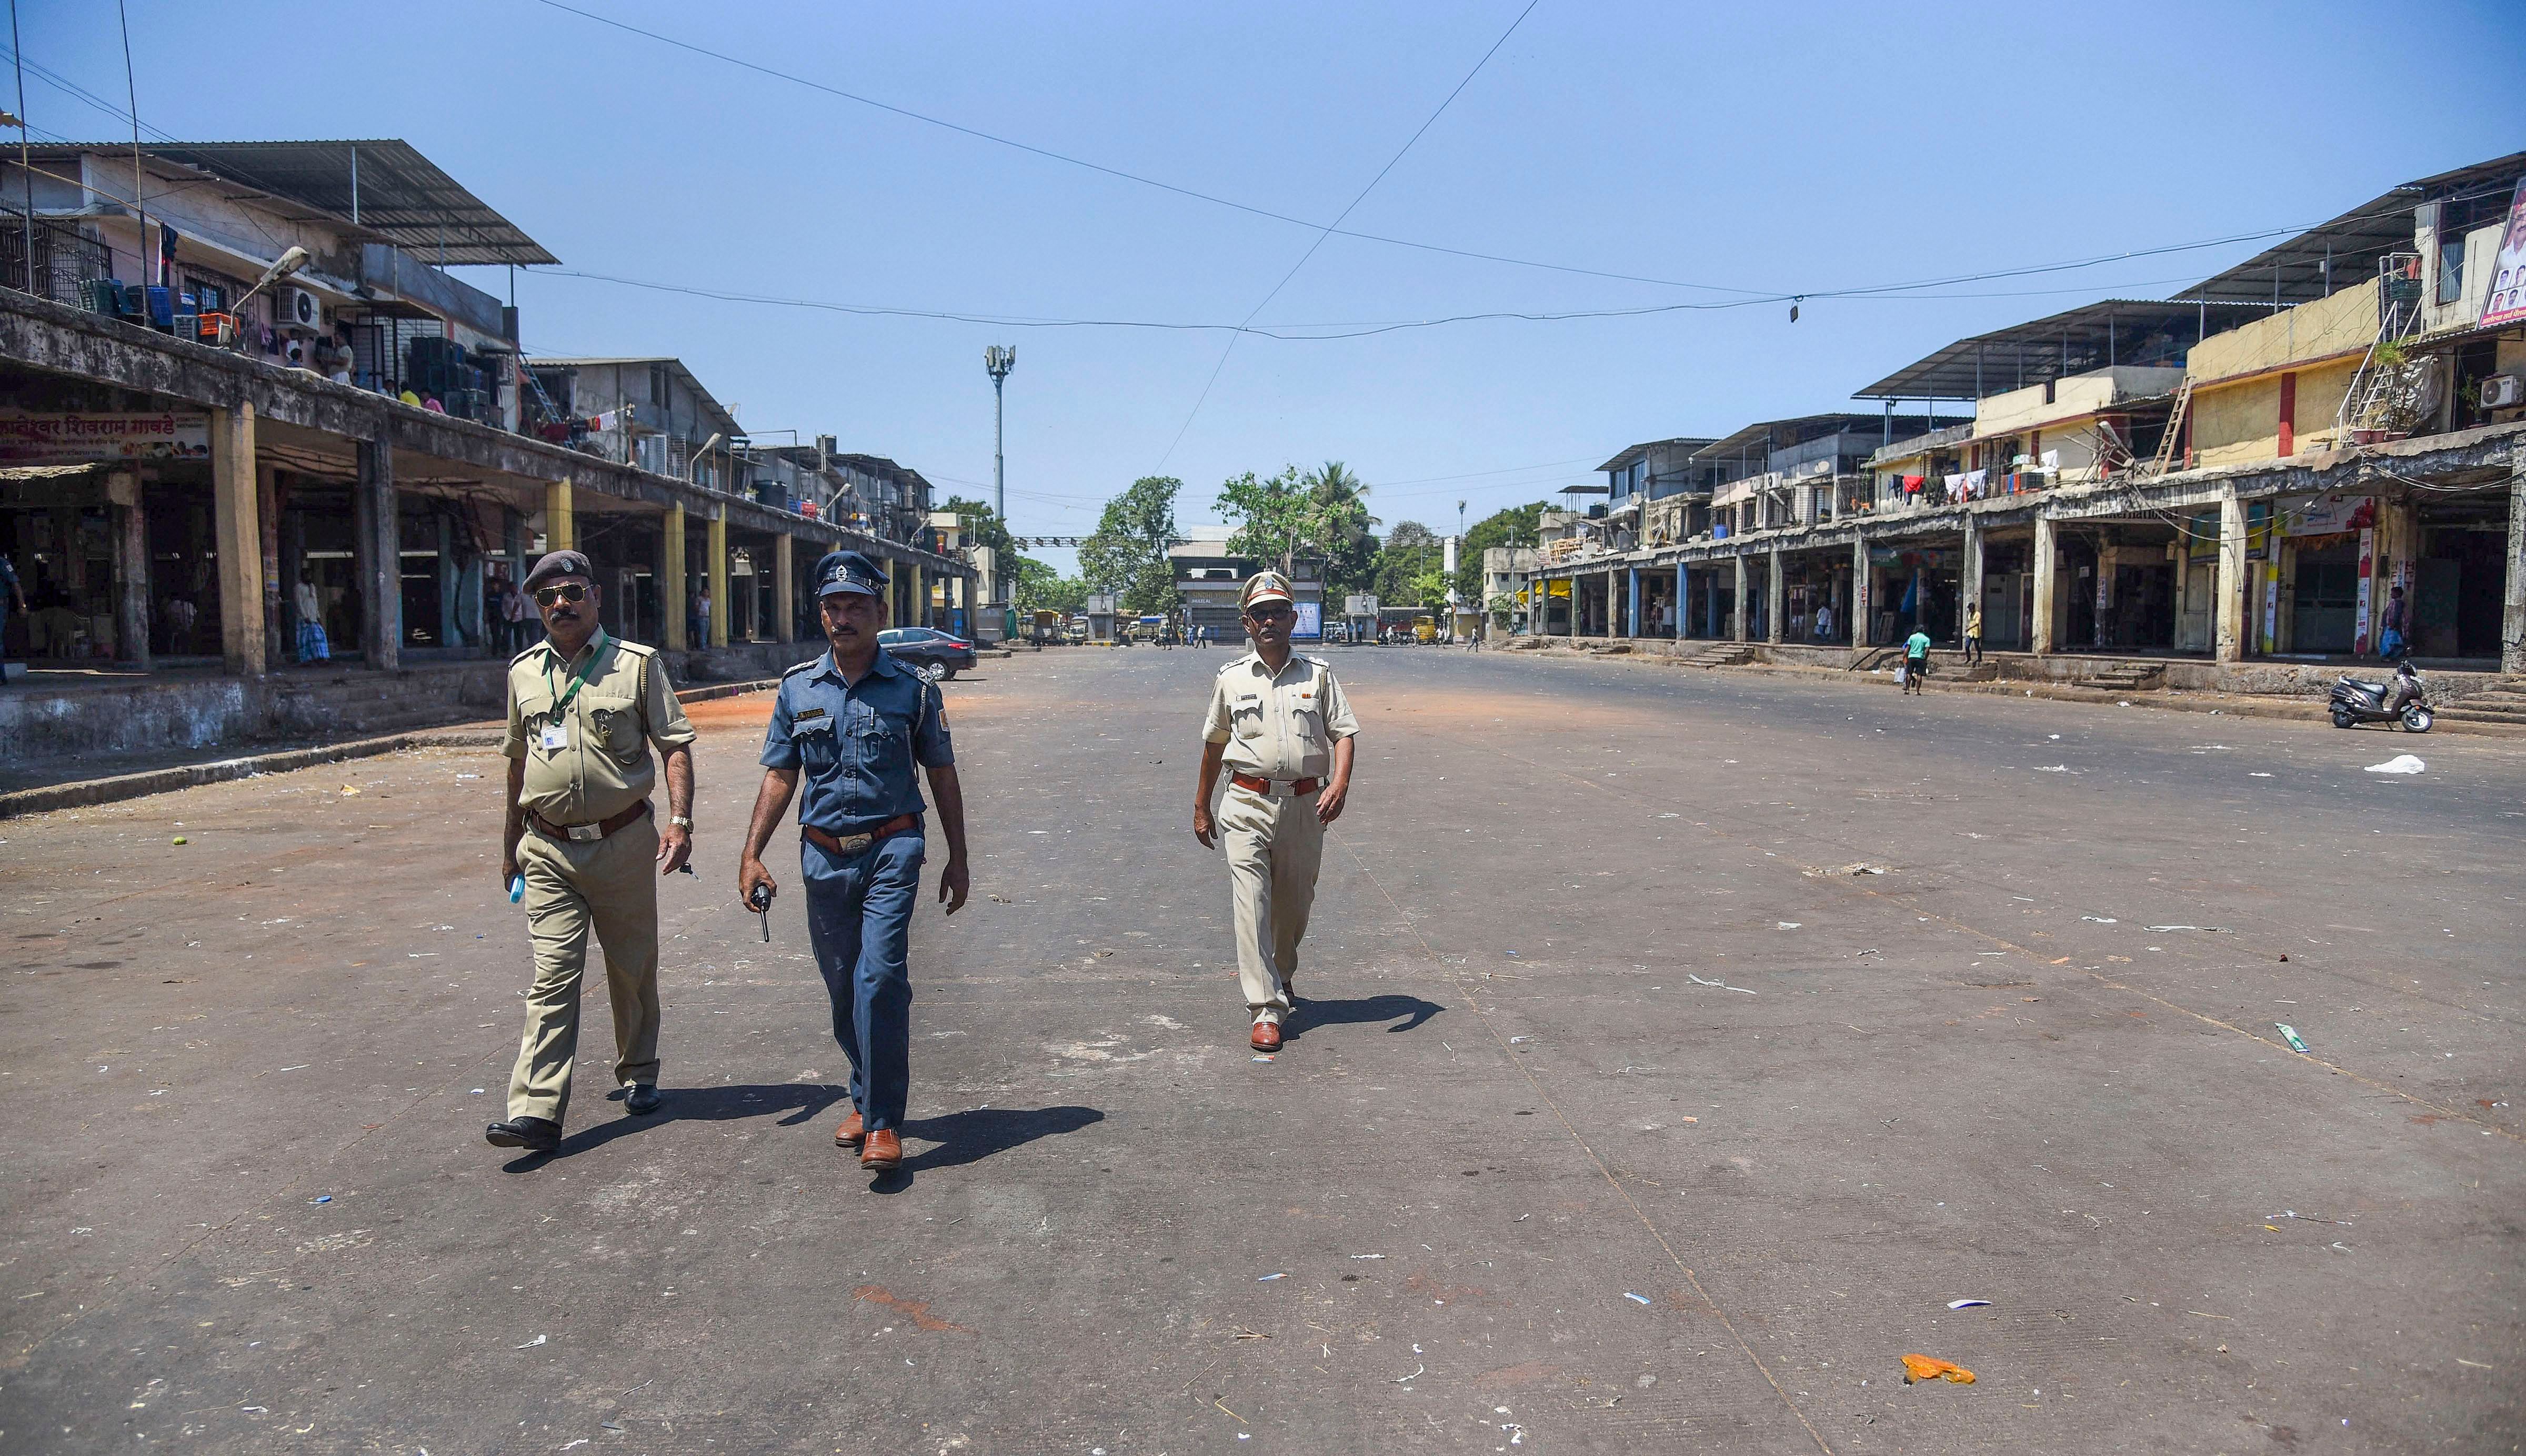 Police personnel patrol a deserted street of APMC market after it was closed in wake of coronavirus outbreak, in Navi Mumbai. (Credit: PTI)